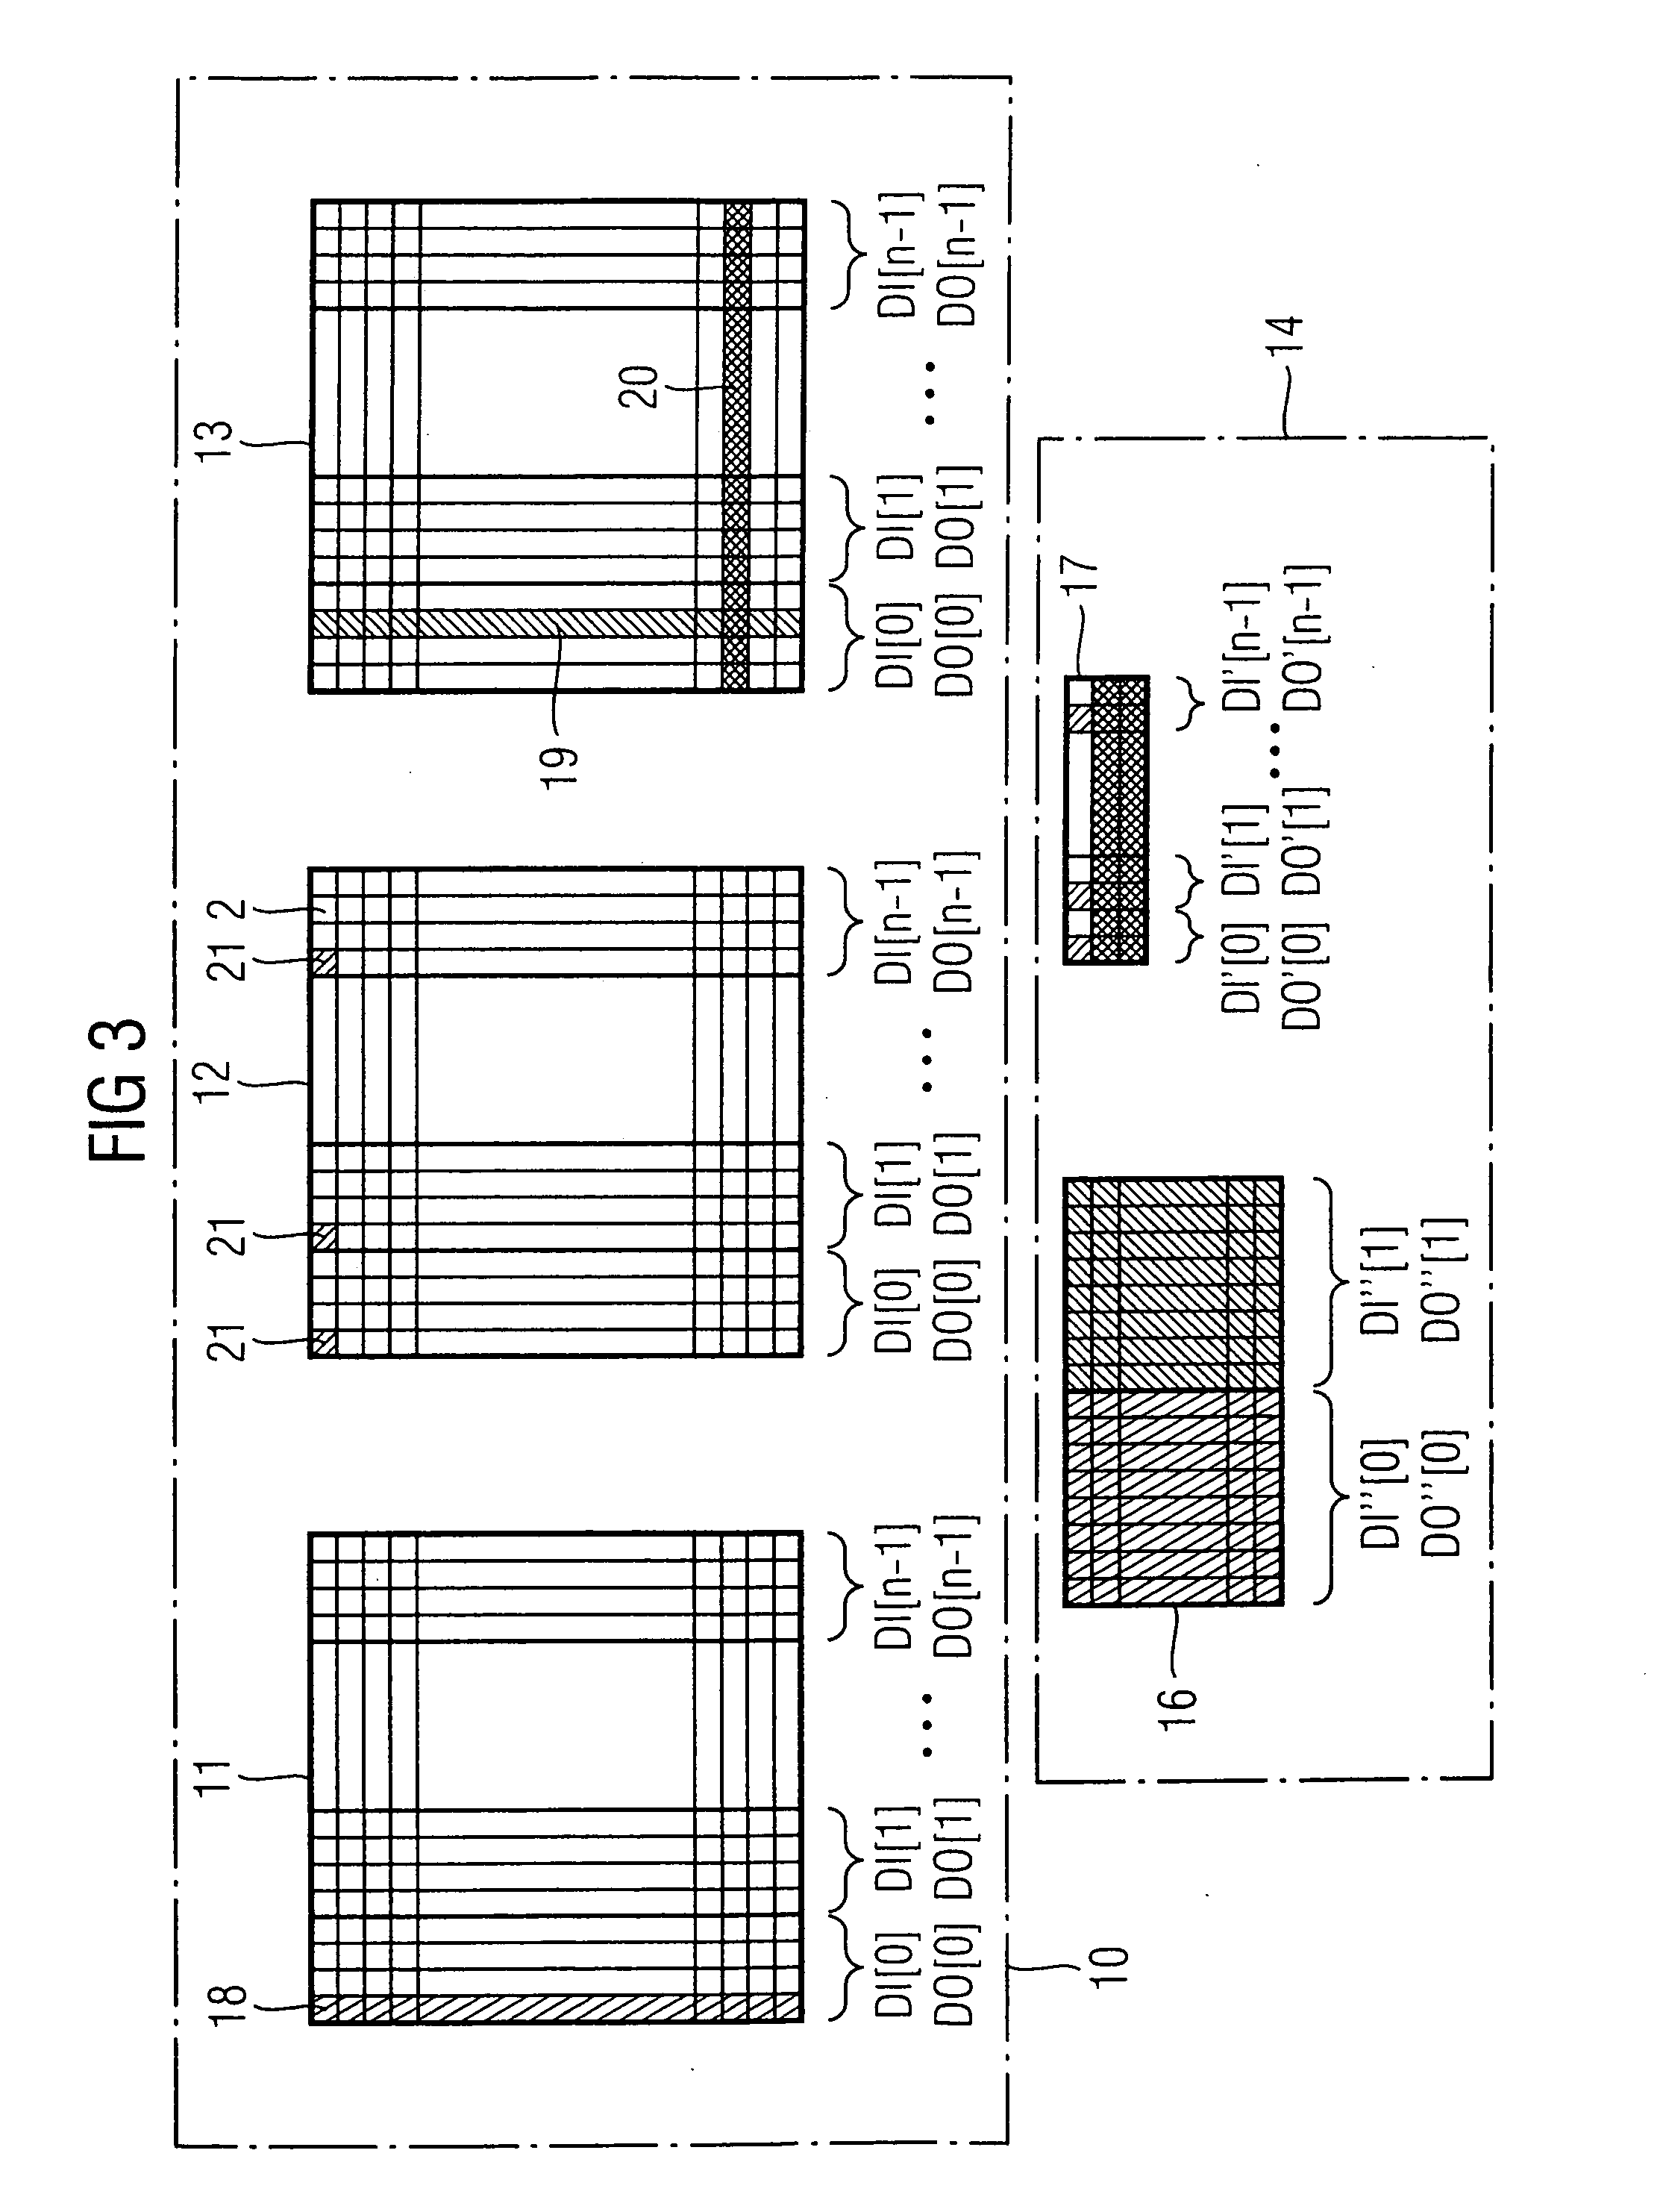 Memory circuit with flexible bitline-related and/or wordline-related defect memory cell substitution